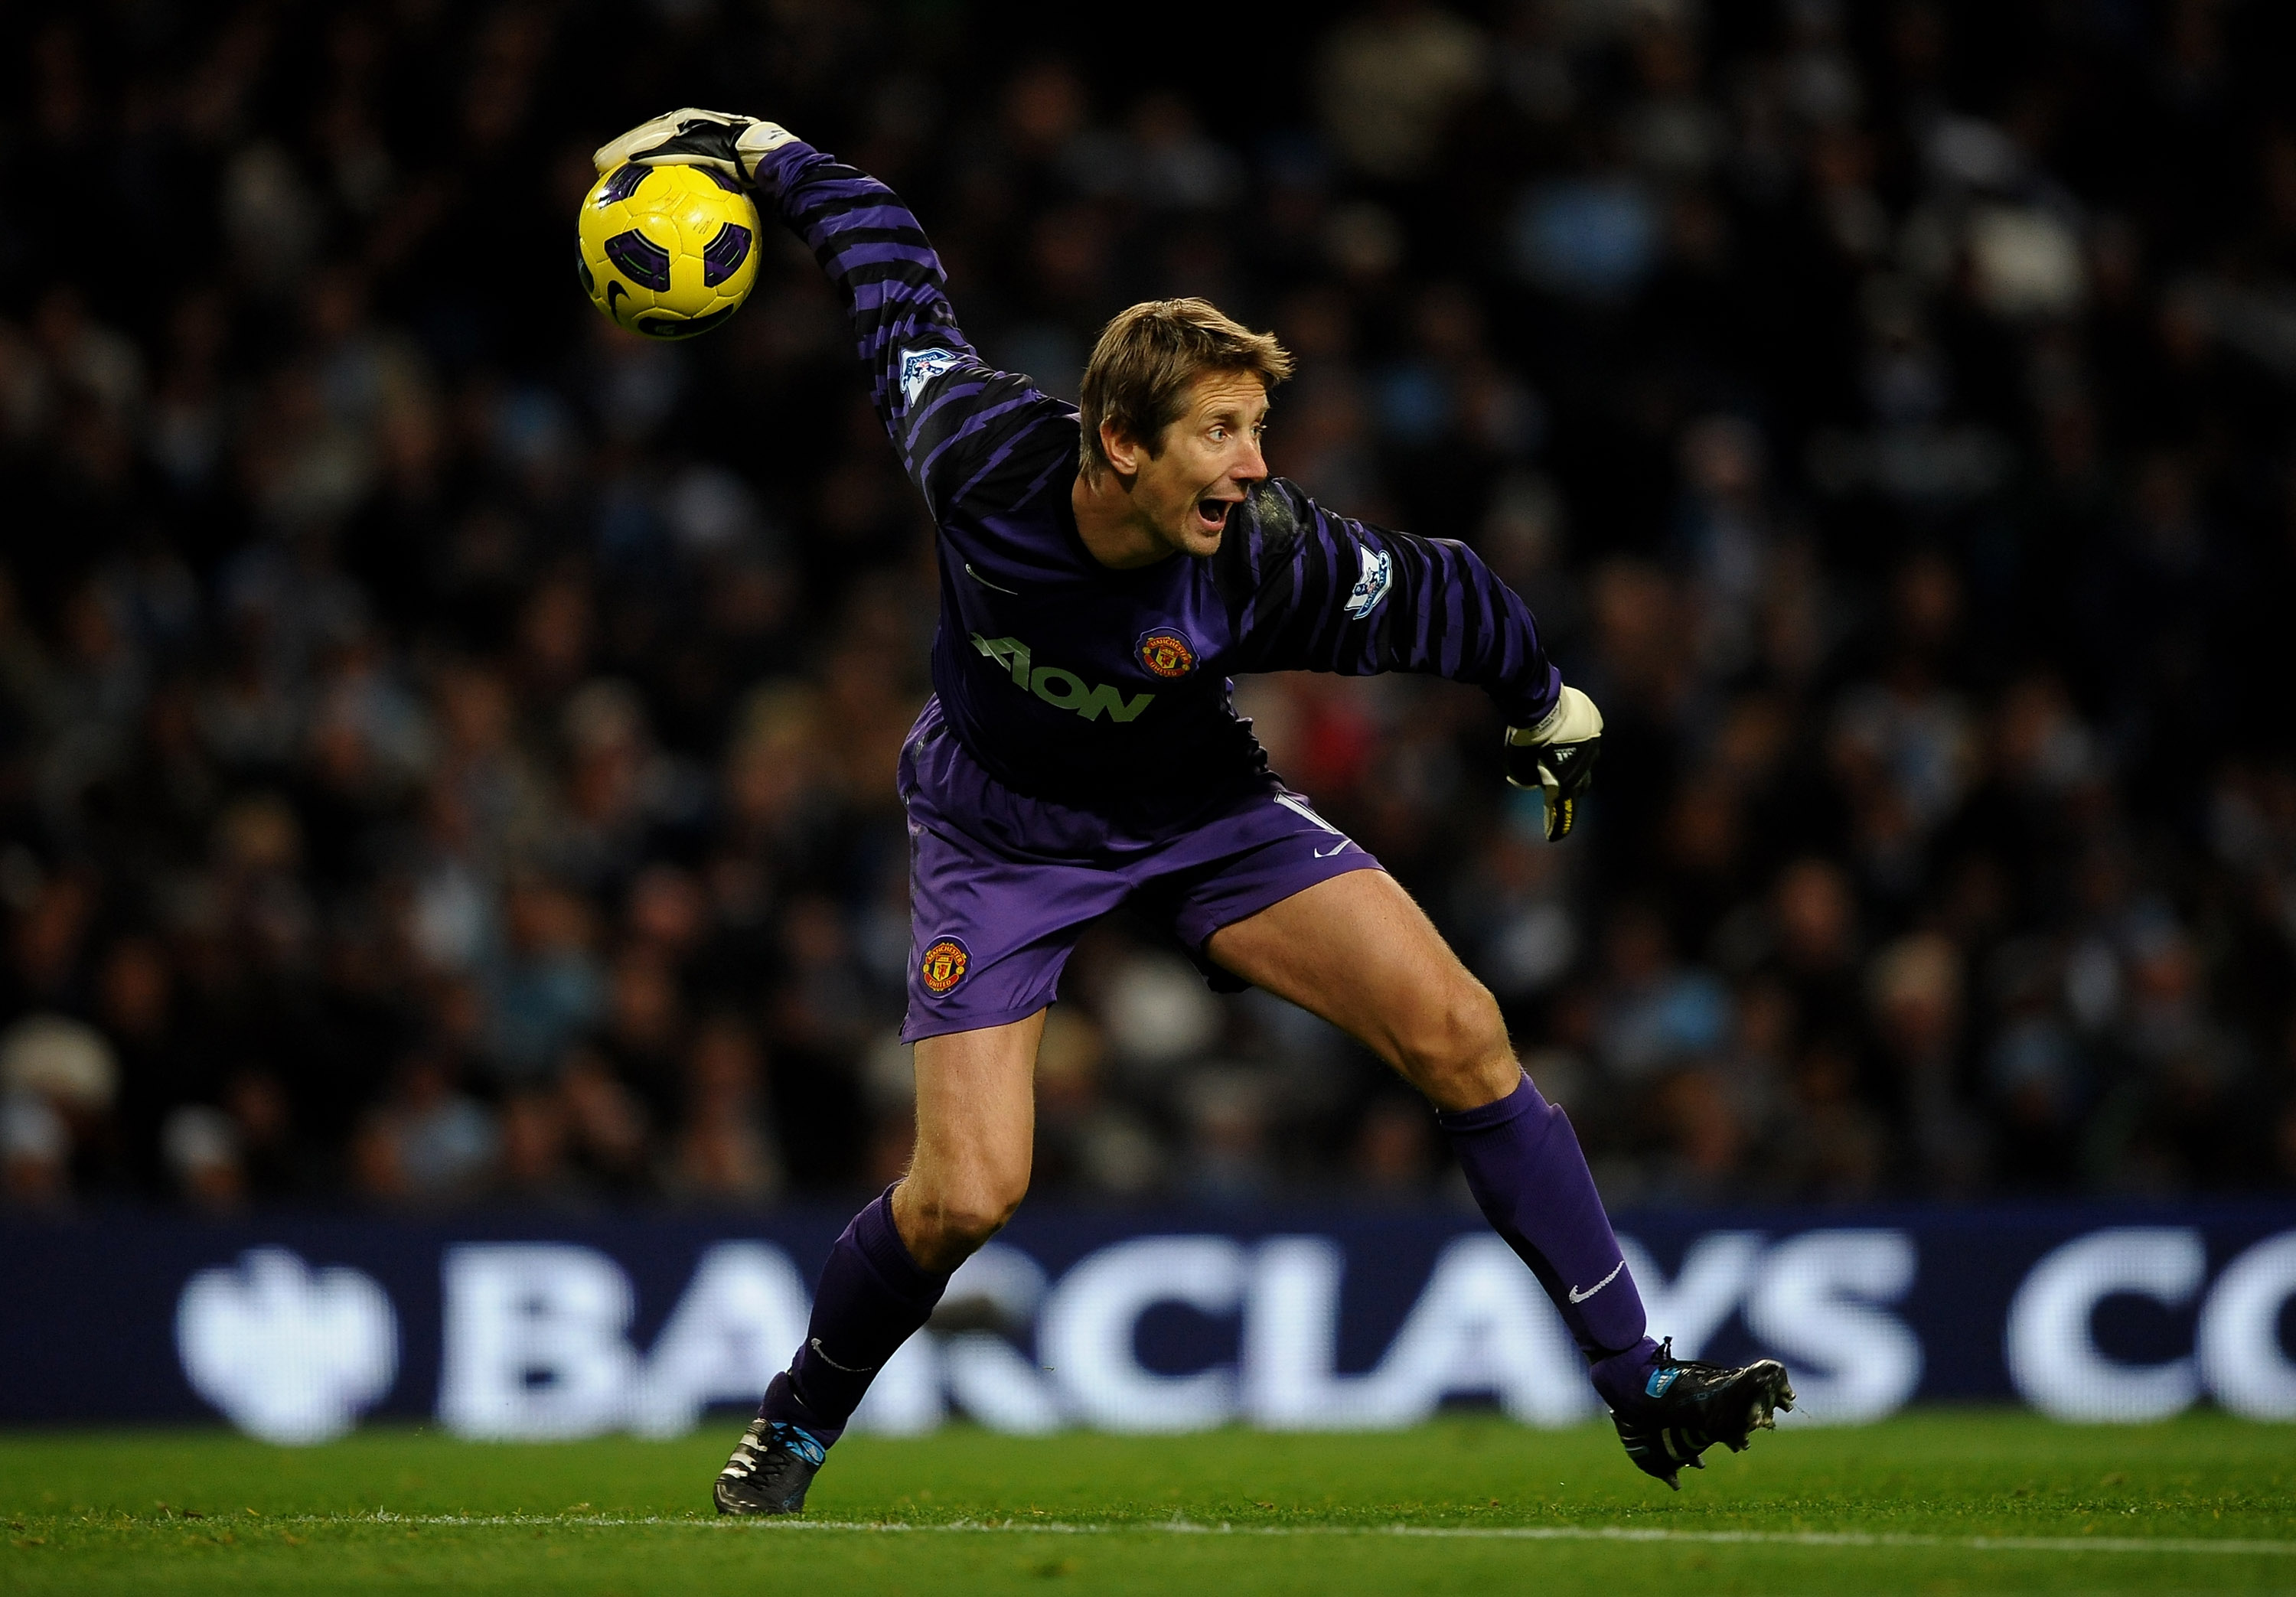 MANCHESTER, ENGLAND - NOVEMBER 10:   Edwin van der Sar of Manchester United  in action during the Barclays Premier League match between Manchester City and Manchester United at the City of Manchester Stadium on November 10, 2010 in Manchester, England.  (